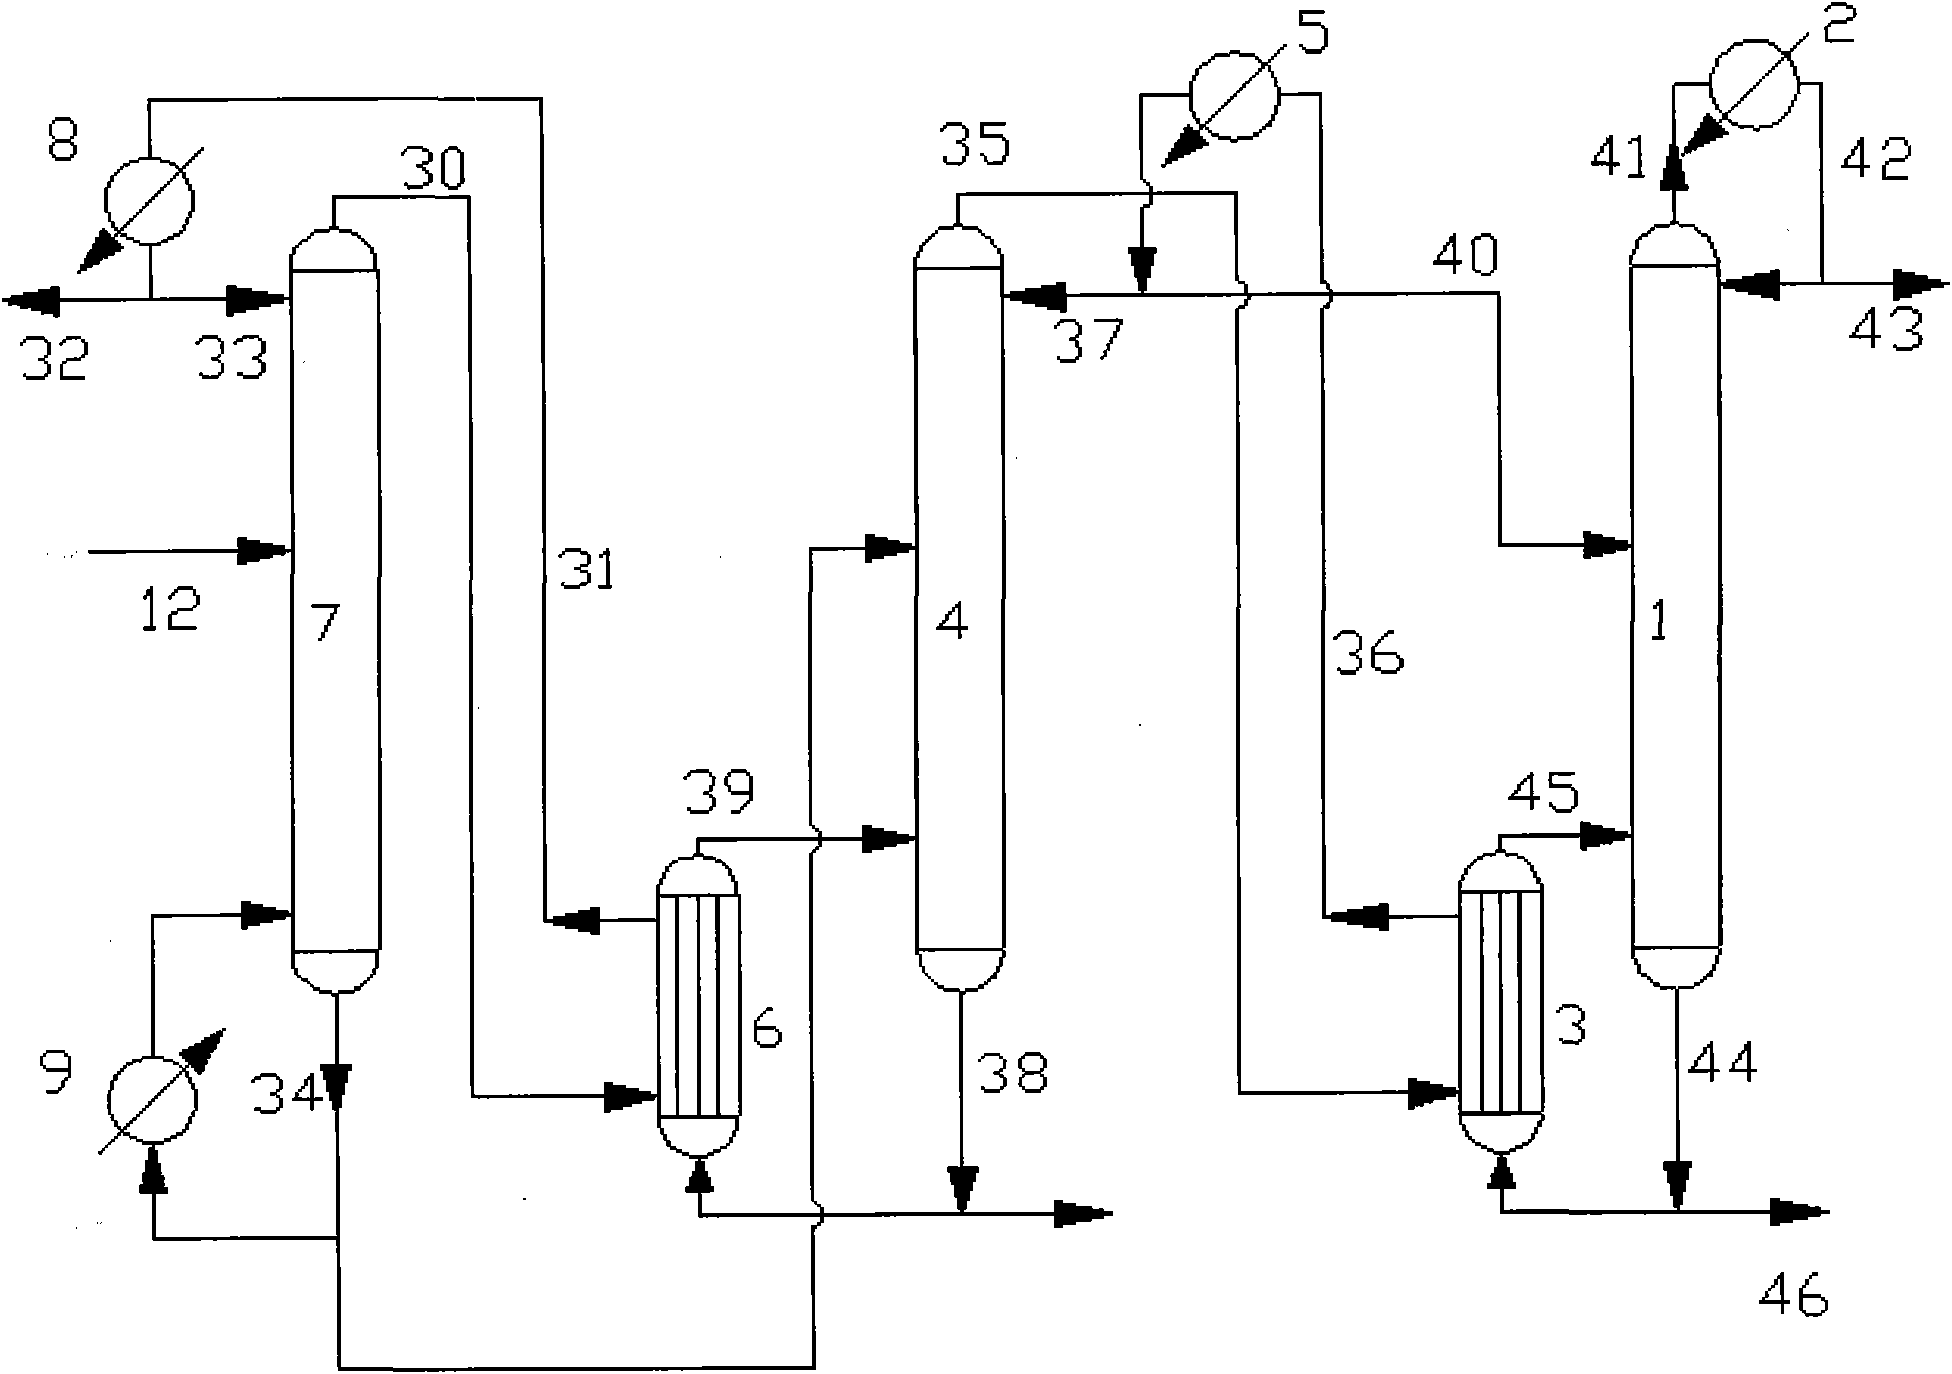 Trichlorosilane three-tower differential pressure coupling energy-saving rectifying and purifying system and operating method